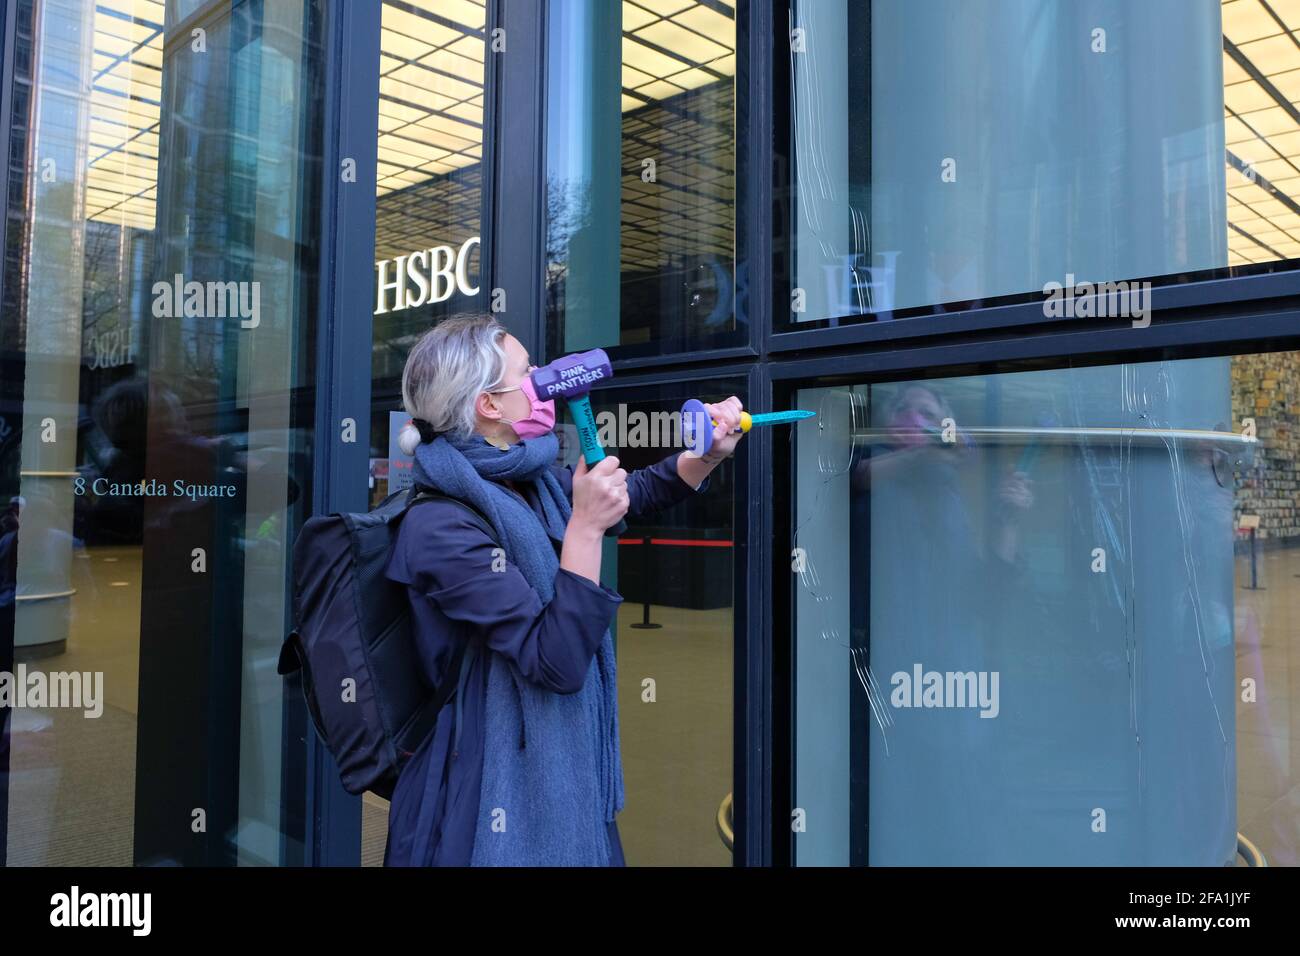 London, UK. April 22nd, 2021. Extinction Rebellion women break the windows of HSBC to condemn the bank’s 80 Billion pound investment in fossil fuels over the past 5 years. The group had signs that read “Better Broken Windows than Broken Promises”. Credit: Joao Daniel Pereira. Credit: João Daniel Pereira/Alamy Live News Stock Photo